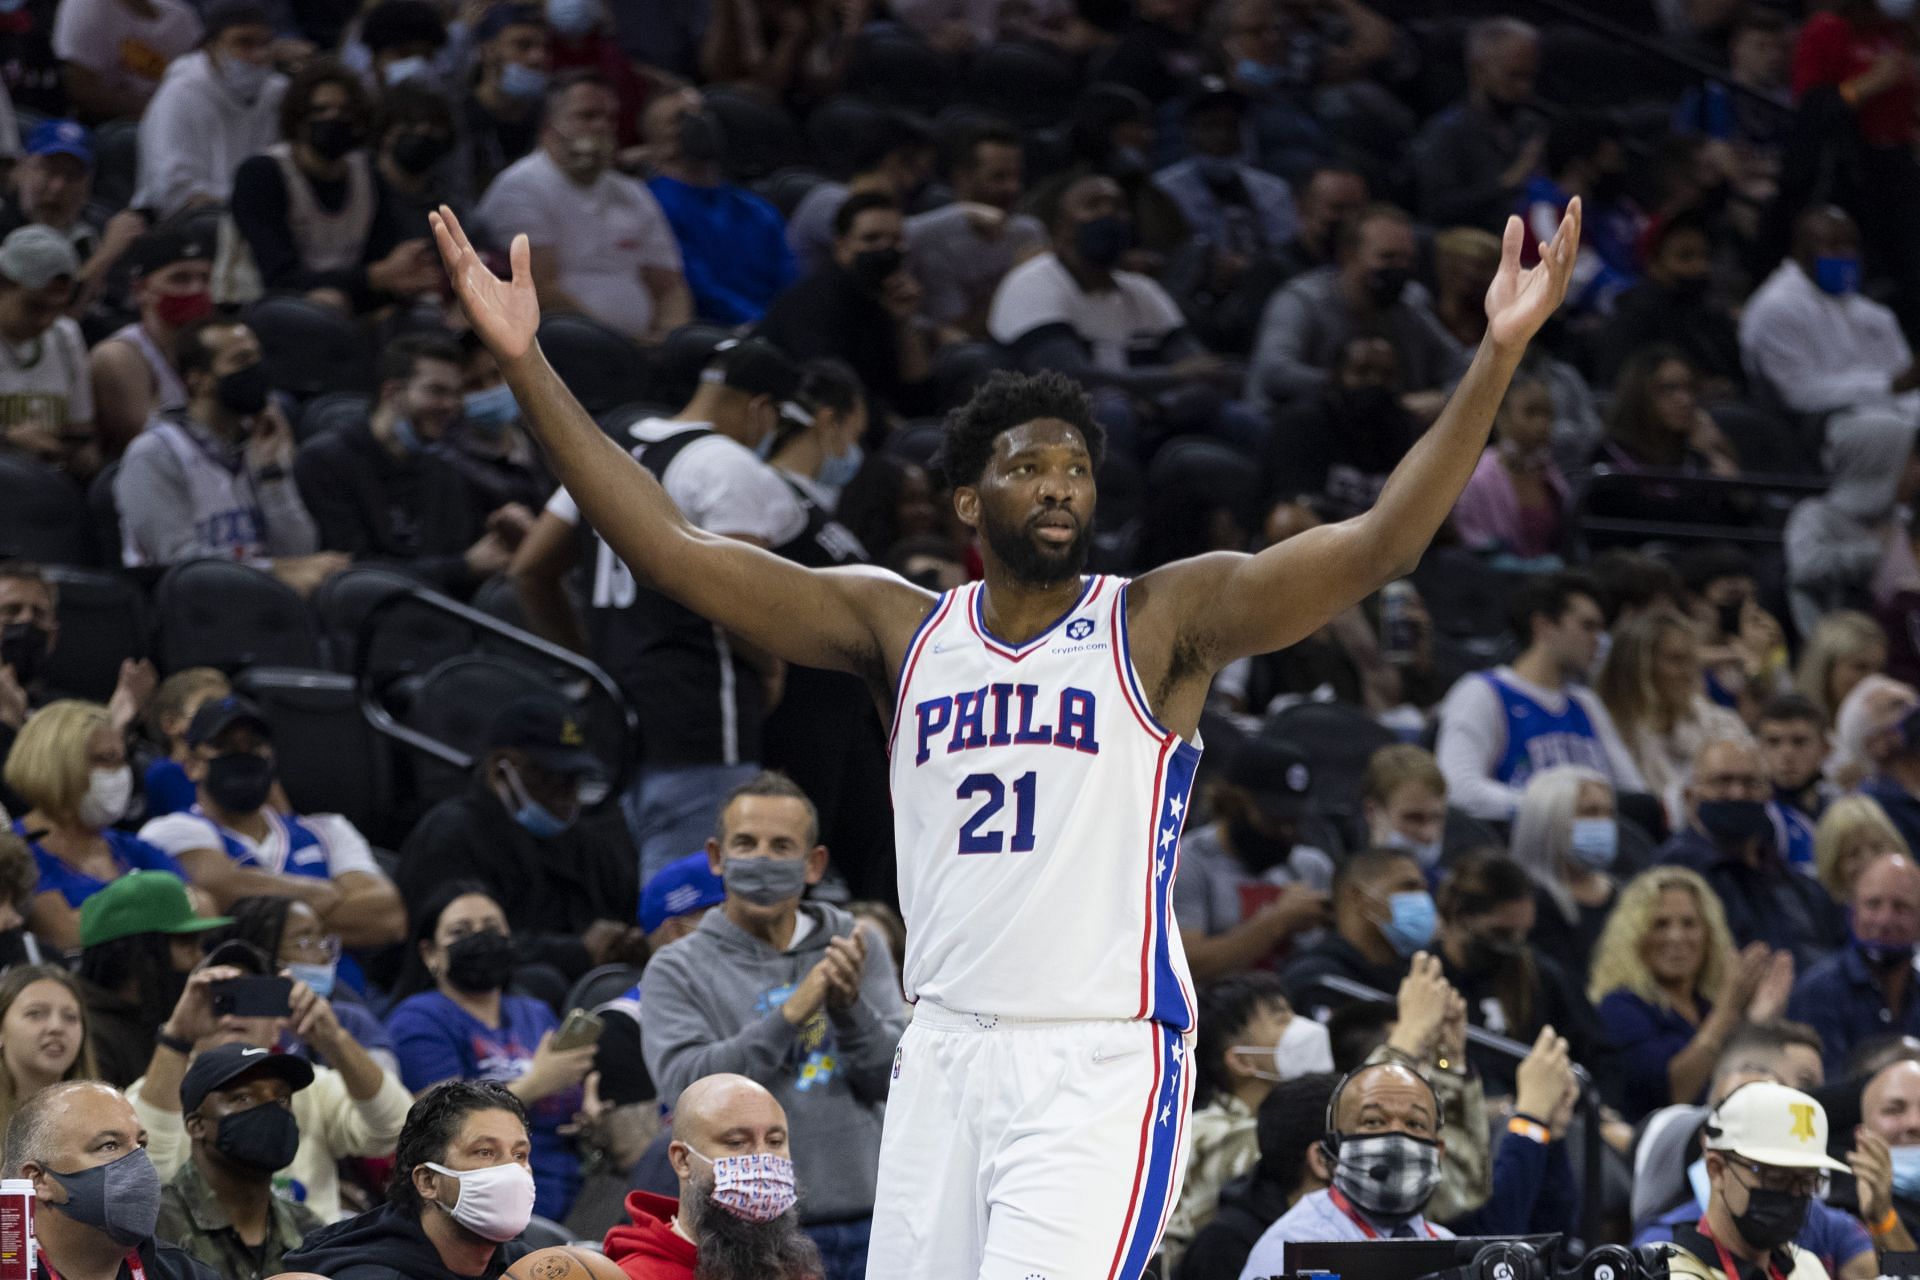 Philadelphia 76ers Joel Embiid hyping up the crowd